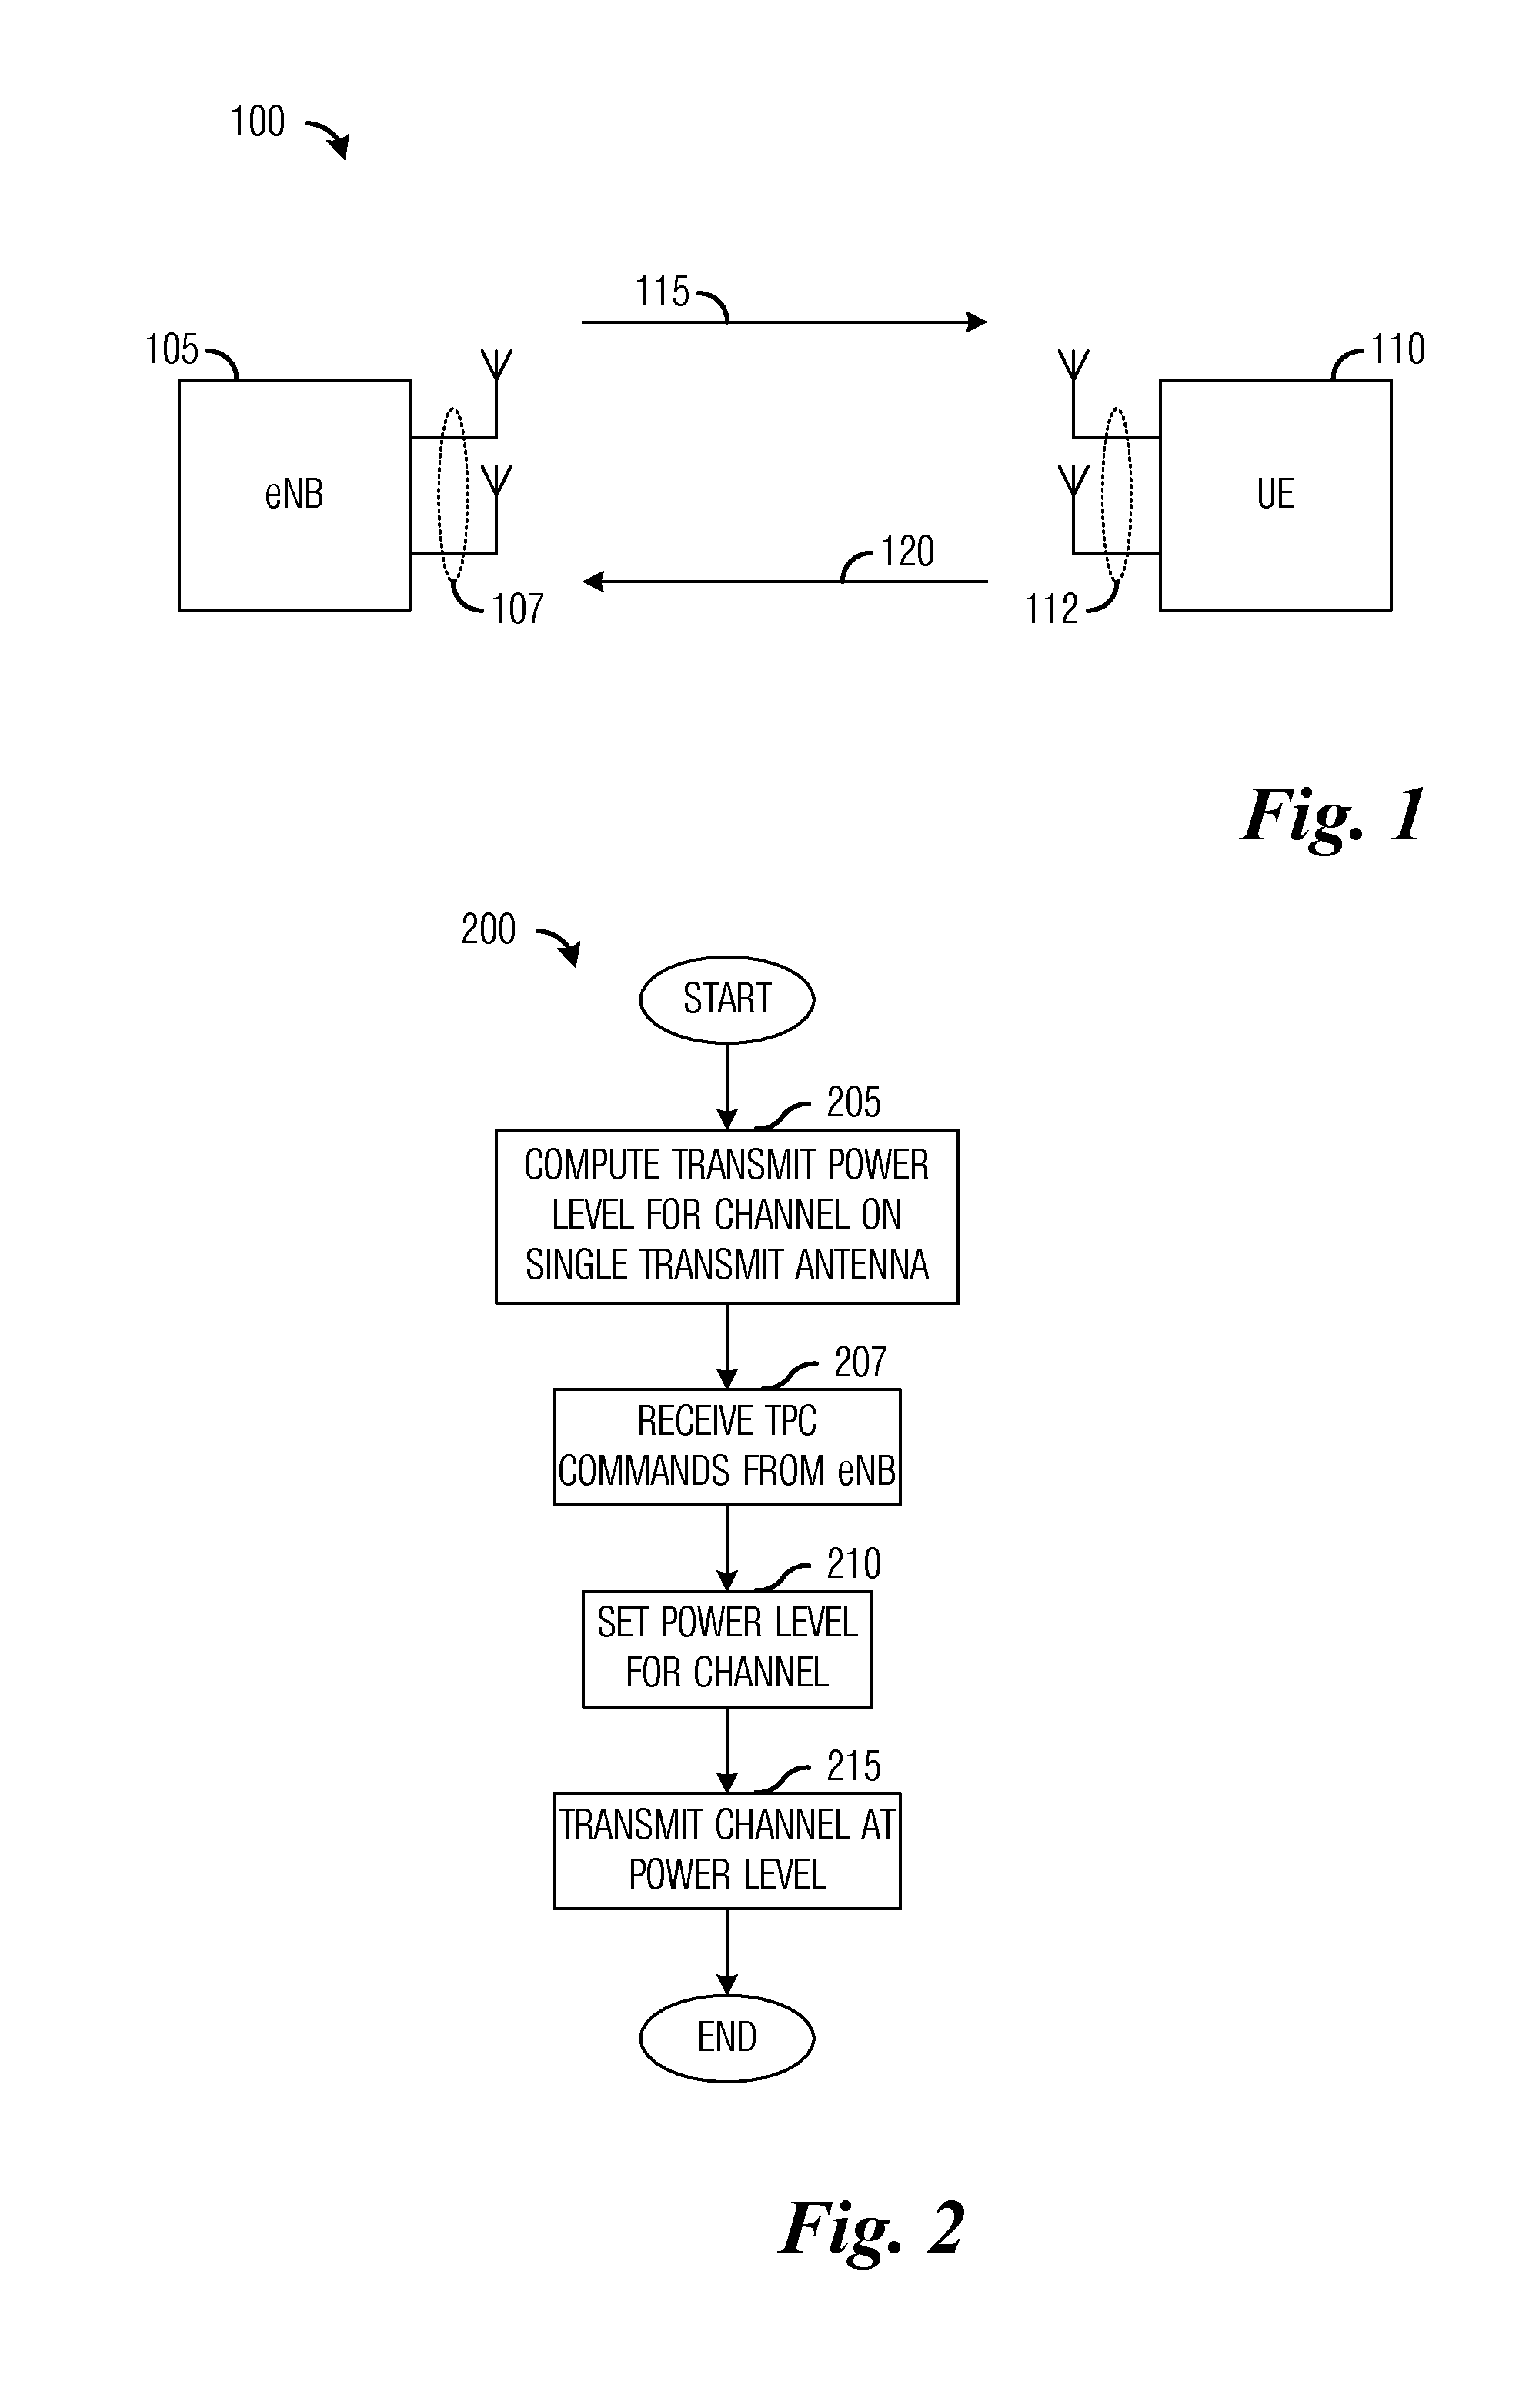 System and Method for Uplink Multi-Antenna Power Control in a Communications System